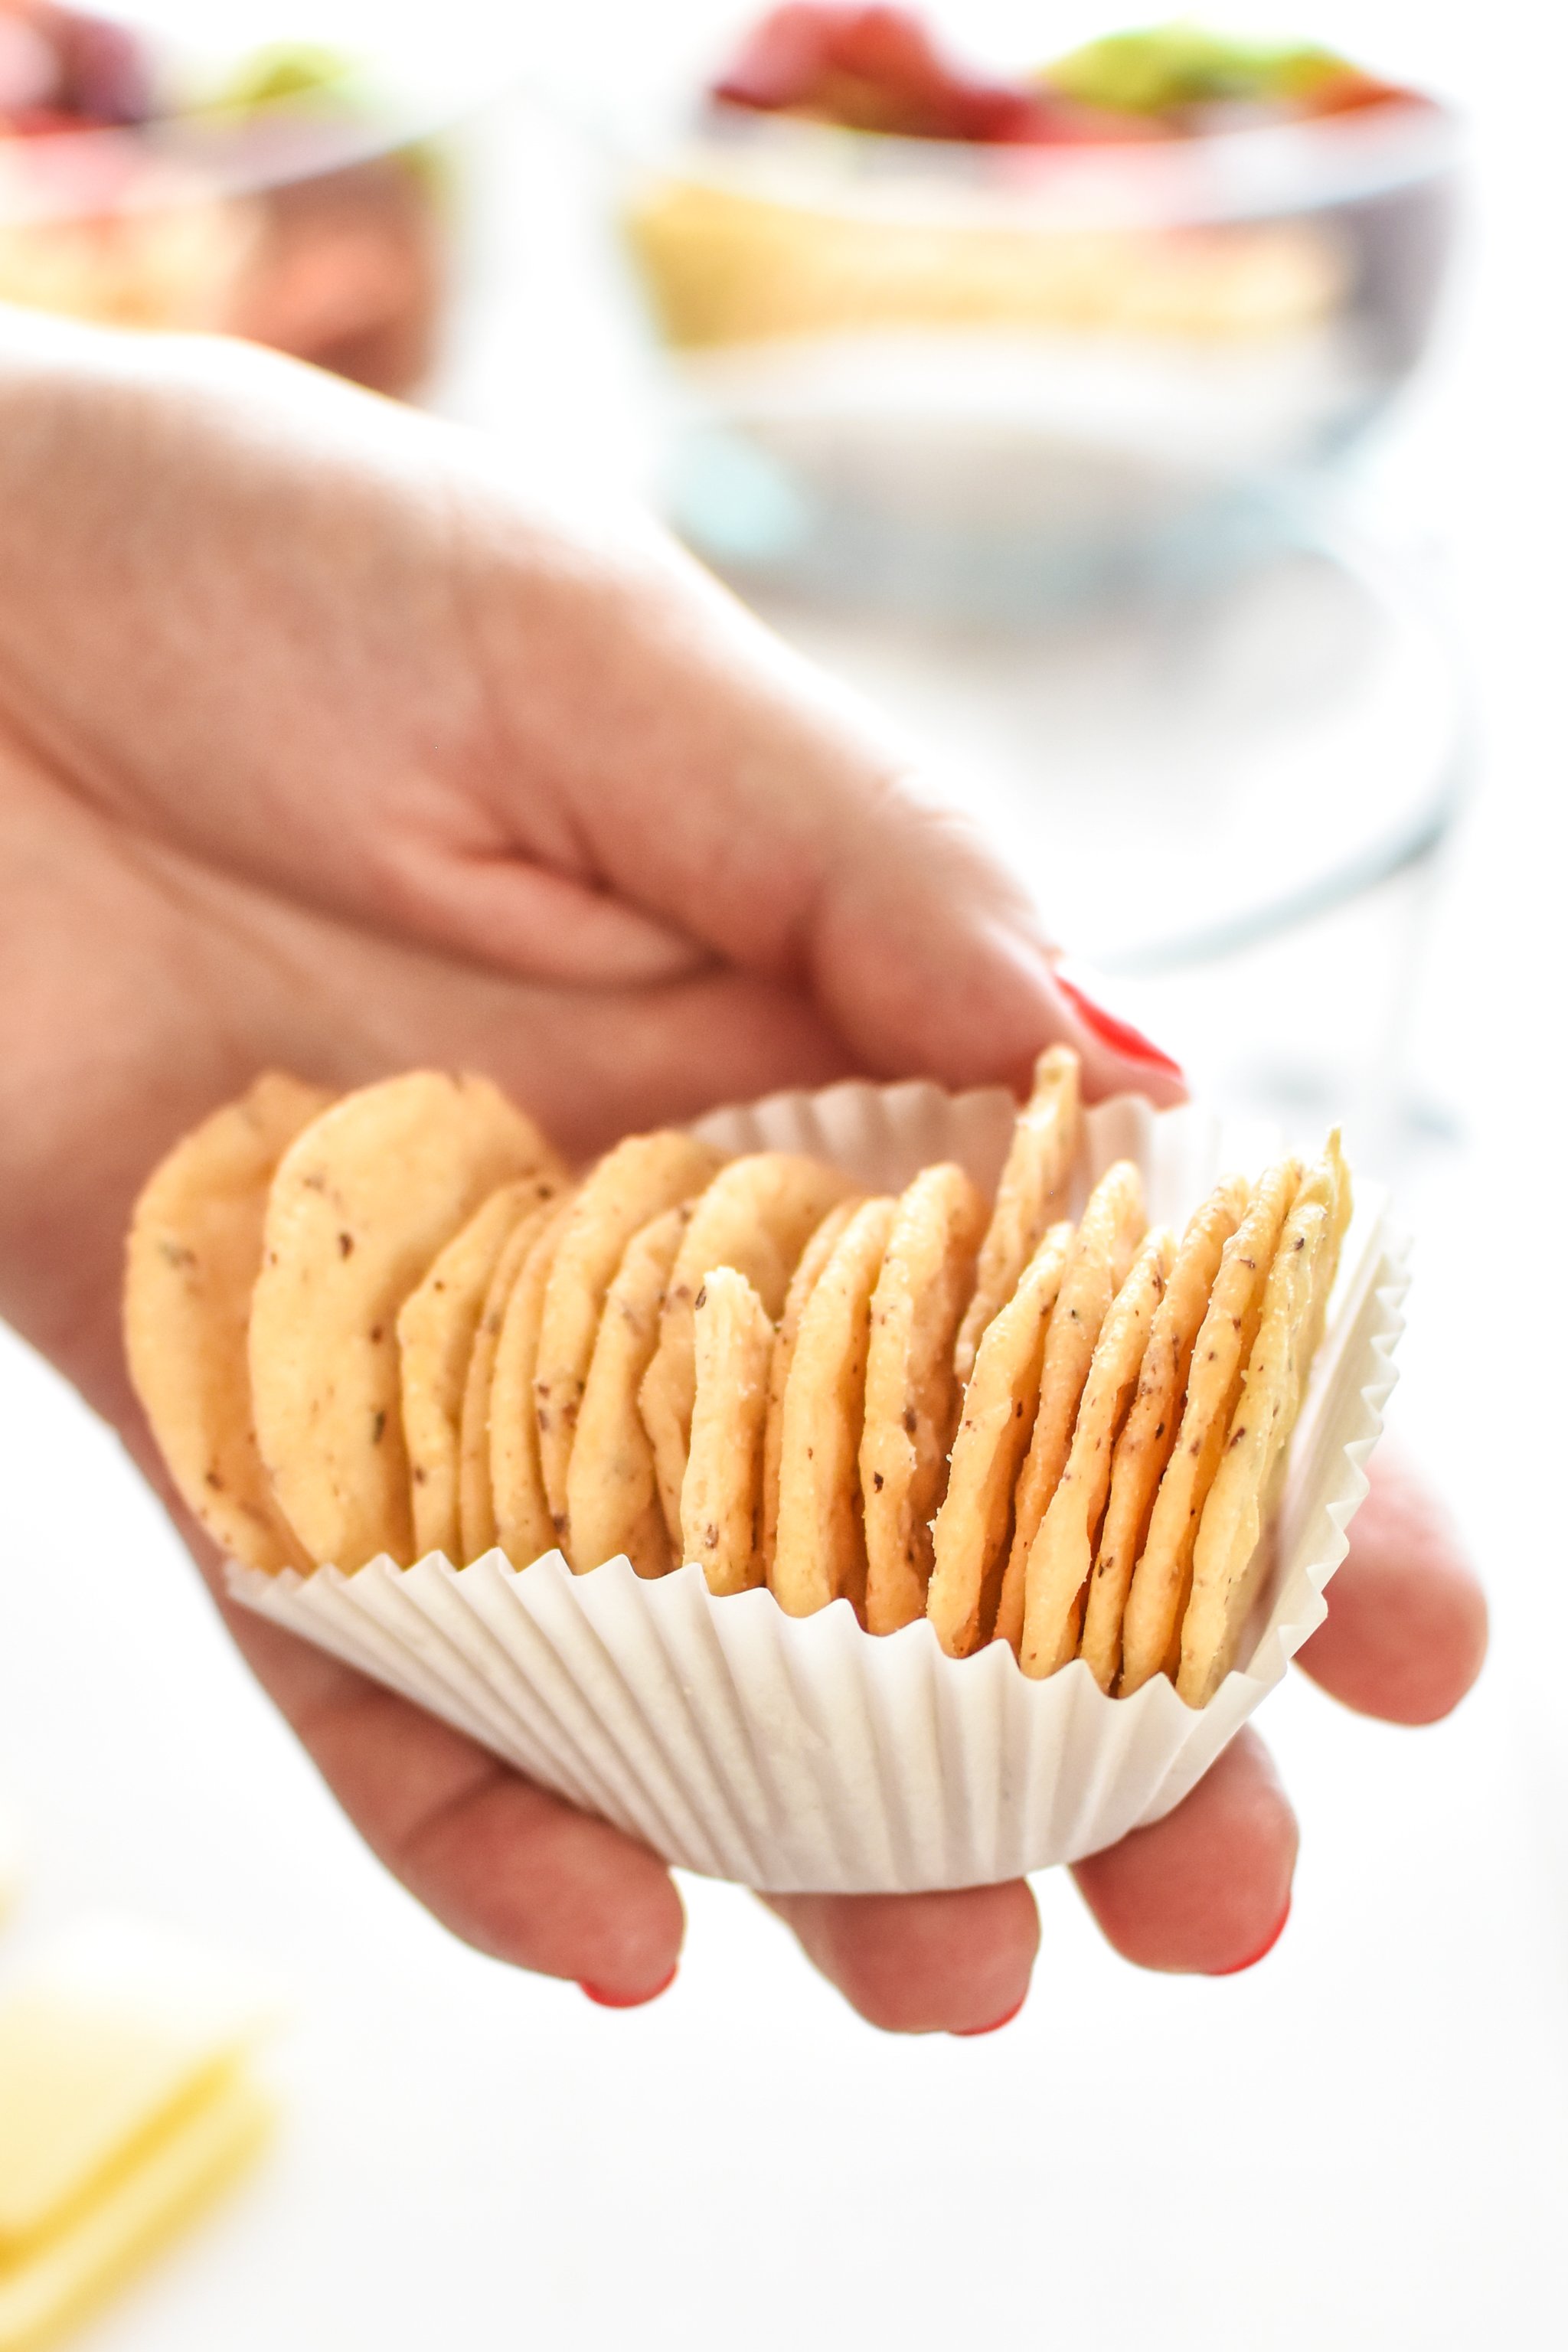 keep your crackers in a separate container or sleeve to reduce moisture